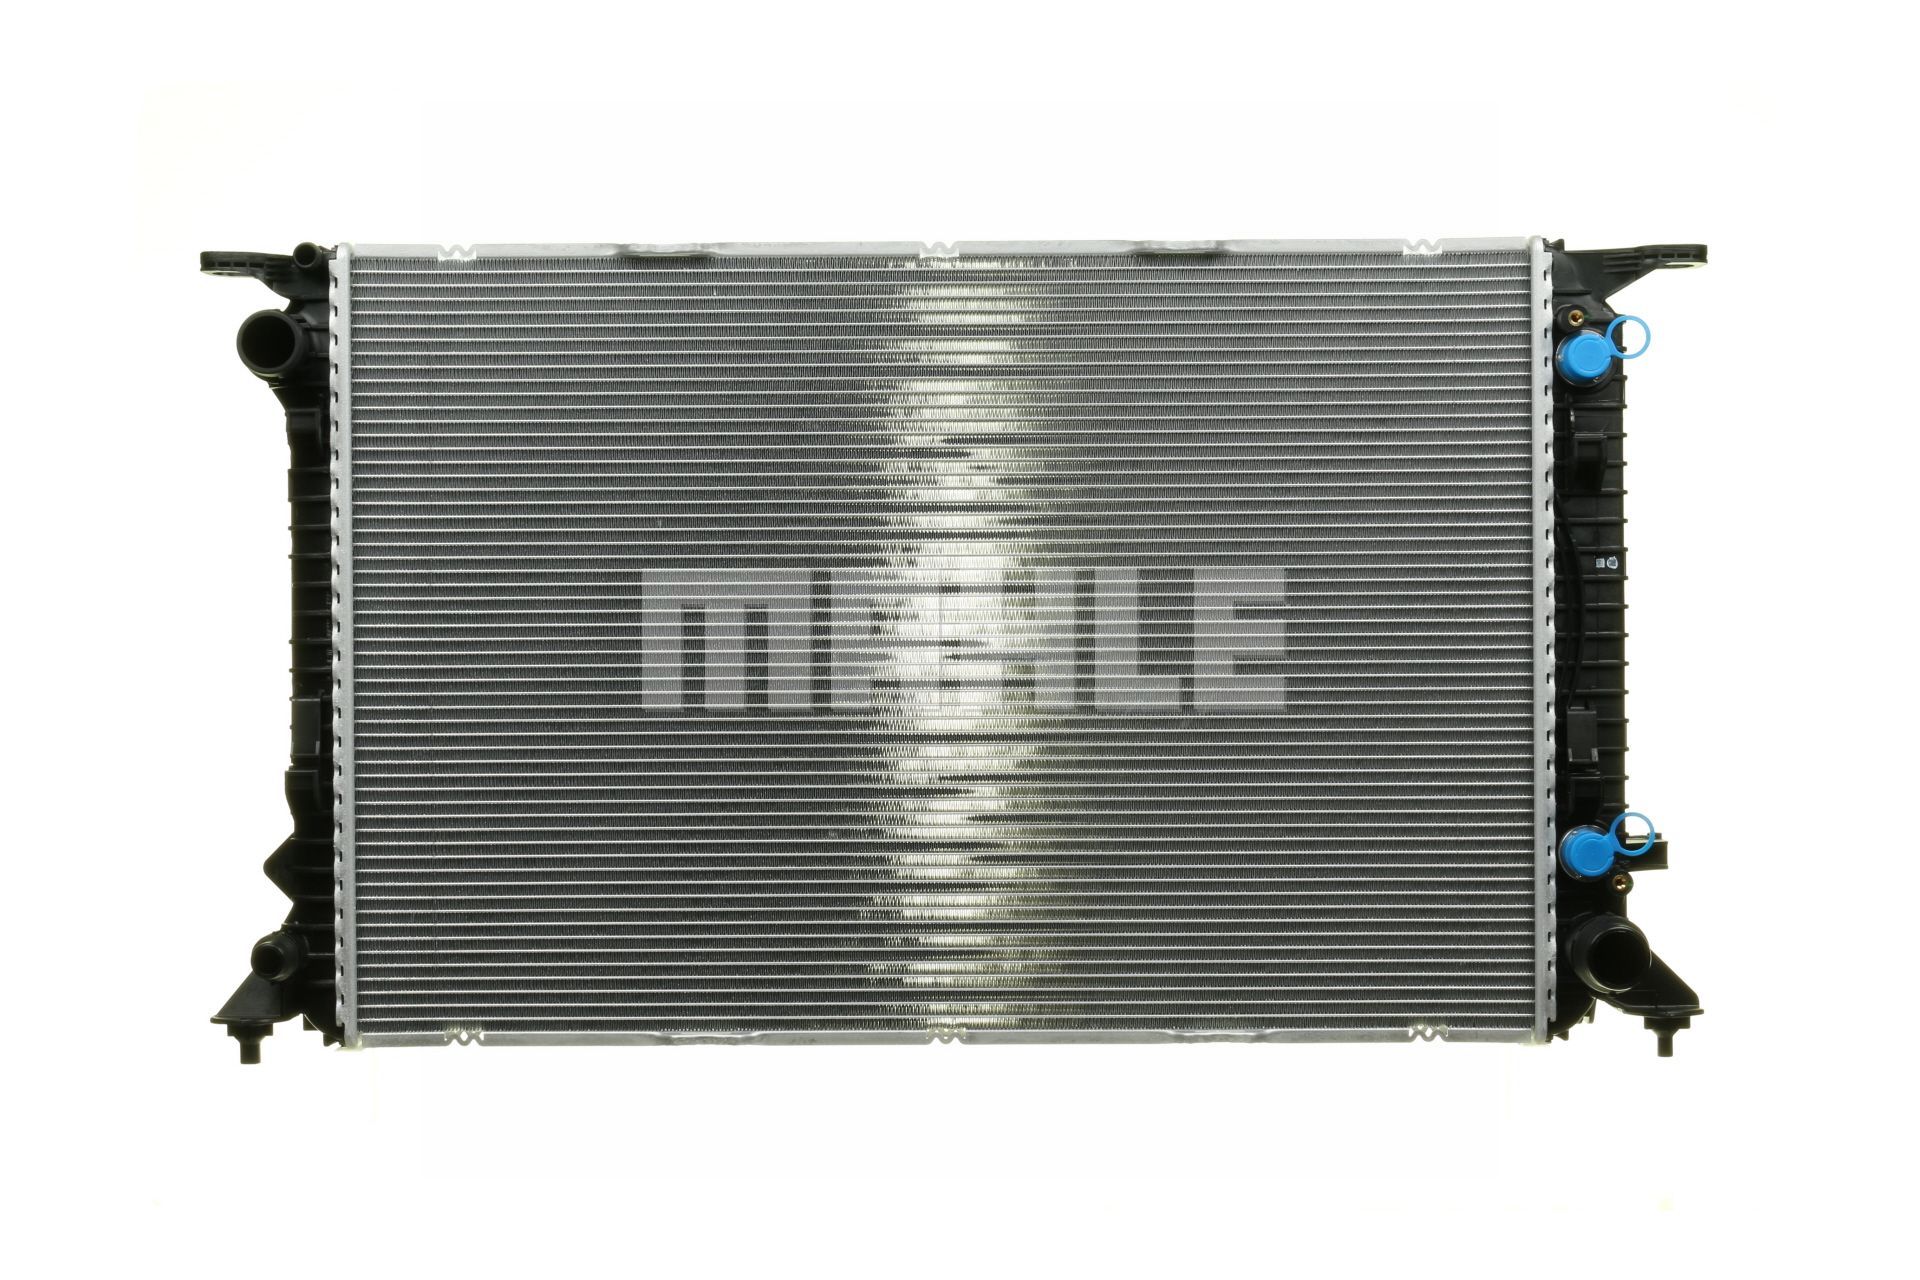 376754751 MAHLE ORIGINAL for vehicles with/without air conditioning, 720 x 474 x 36 mm, Automatic Transmission, Brazed cooling fins Radiator CR 1134 000P buy